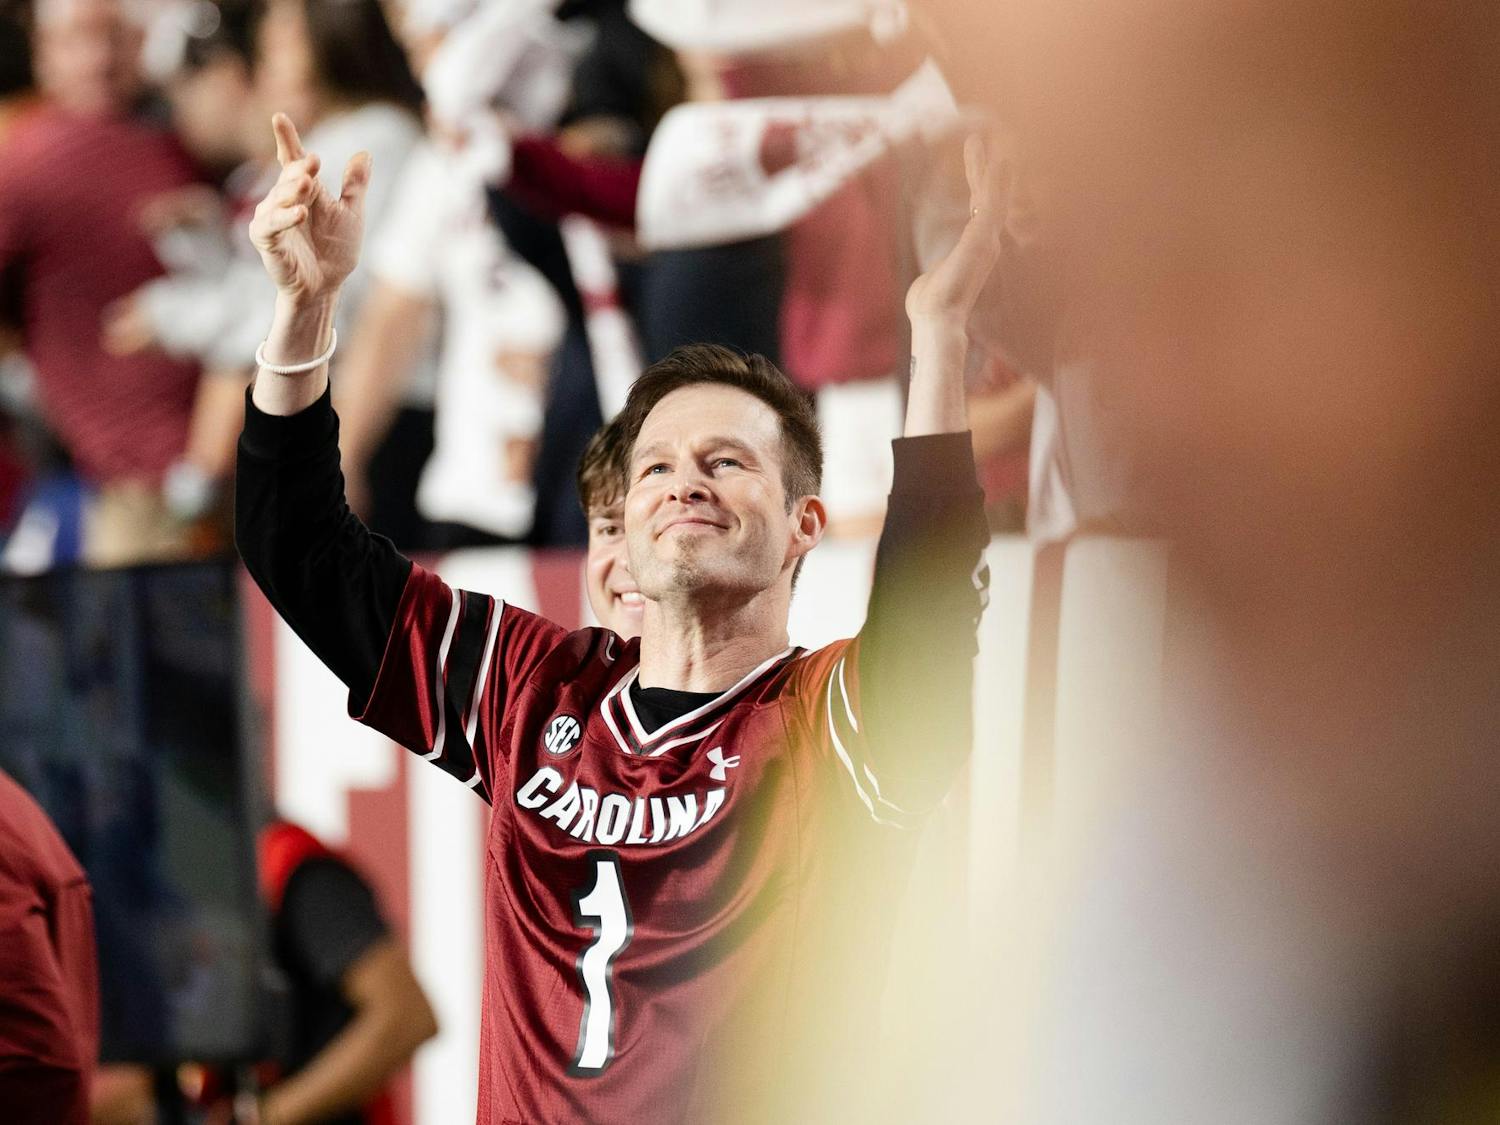 Darude, the creator of the song "Sandstorm," reacts to his song playing in Williams-Brice Stadium. "Sandstorm" was first played by South Carolina in 2009 and has since become a tradition for Gamecock fans.